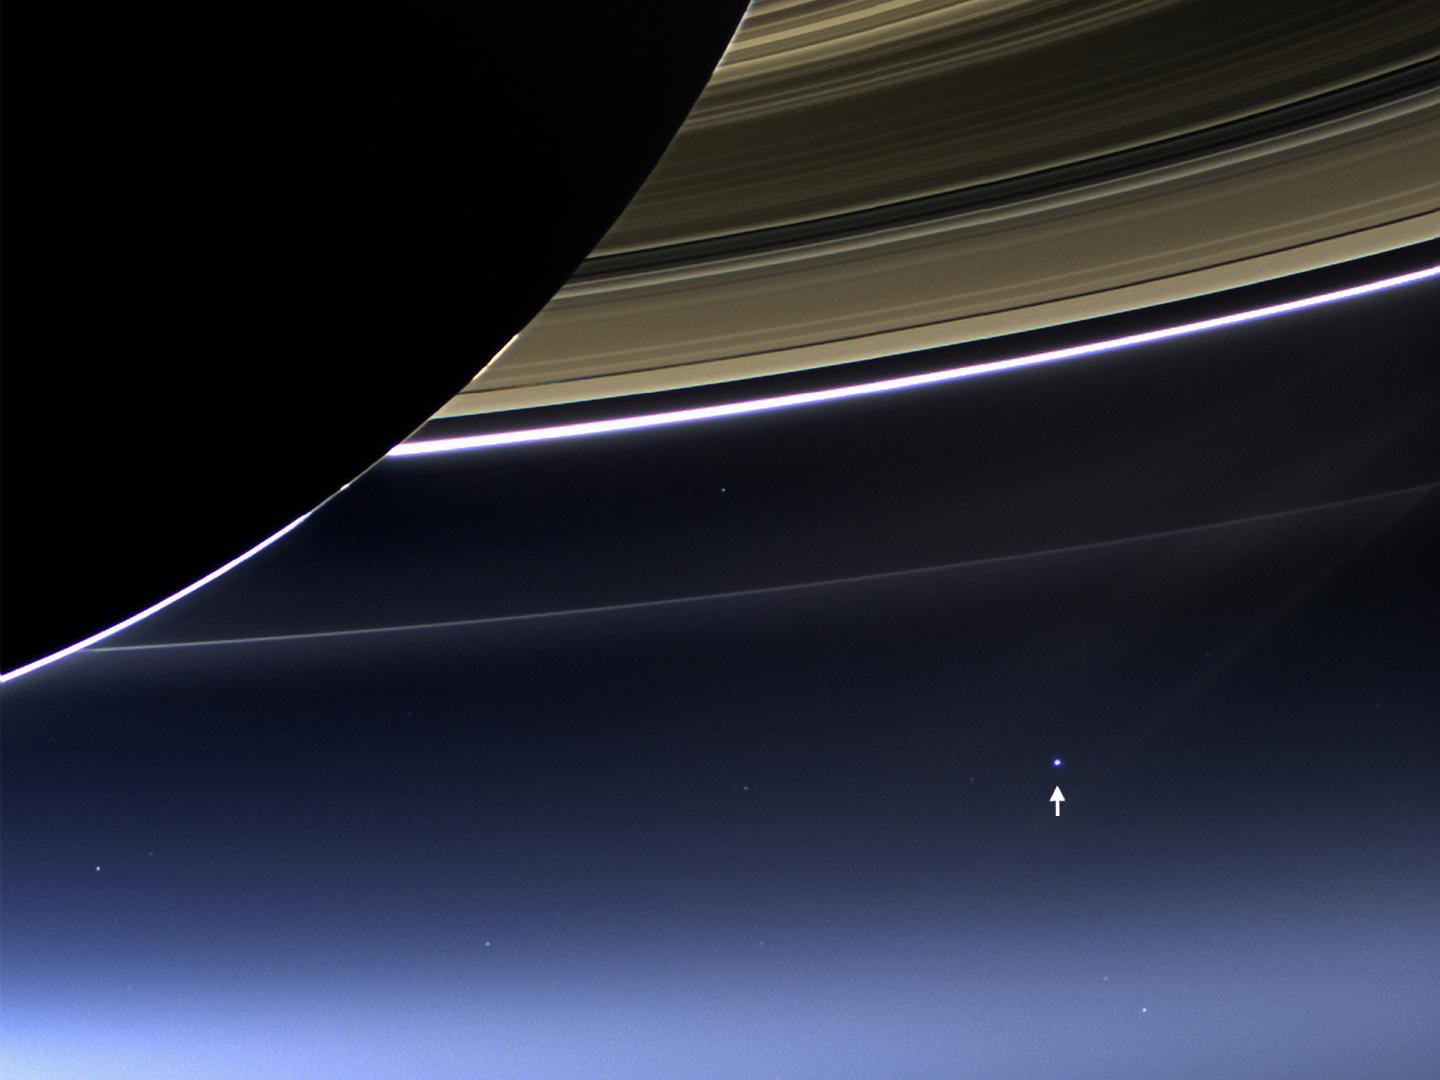 Saturn's rings, Earth and the moon